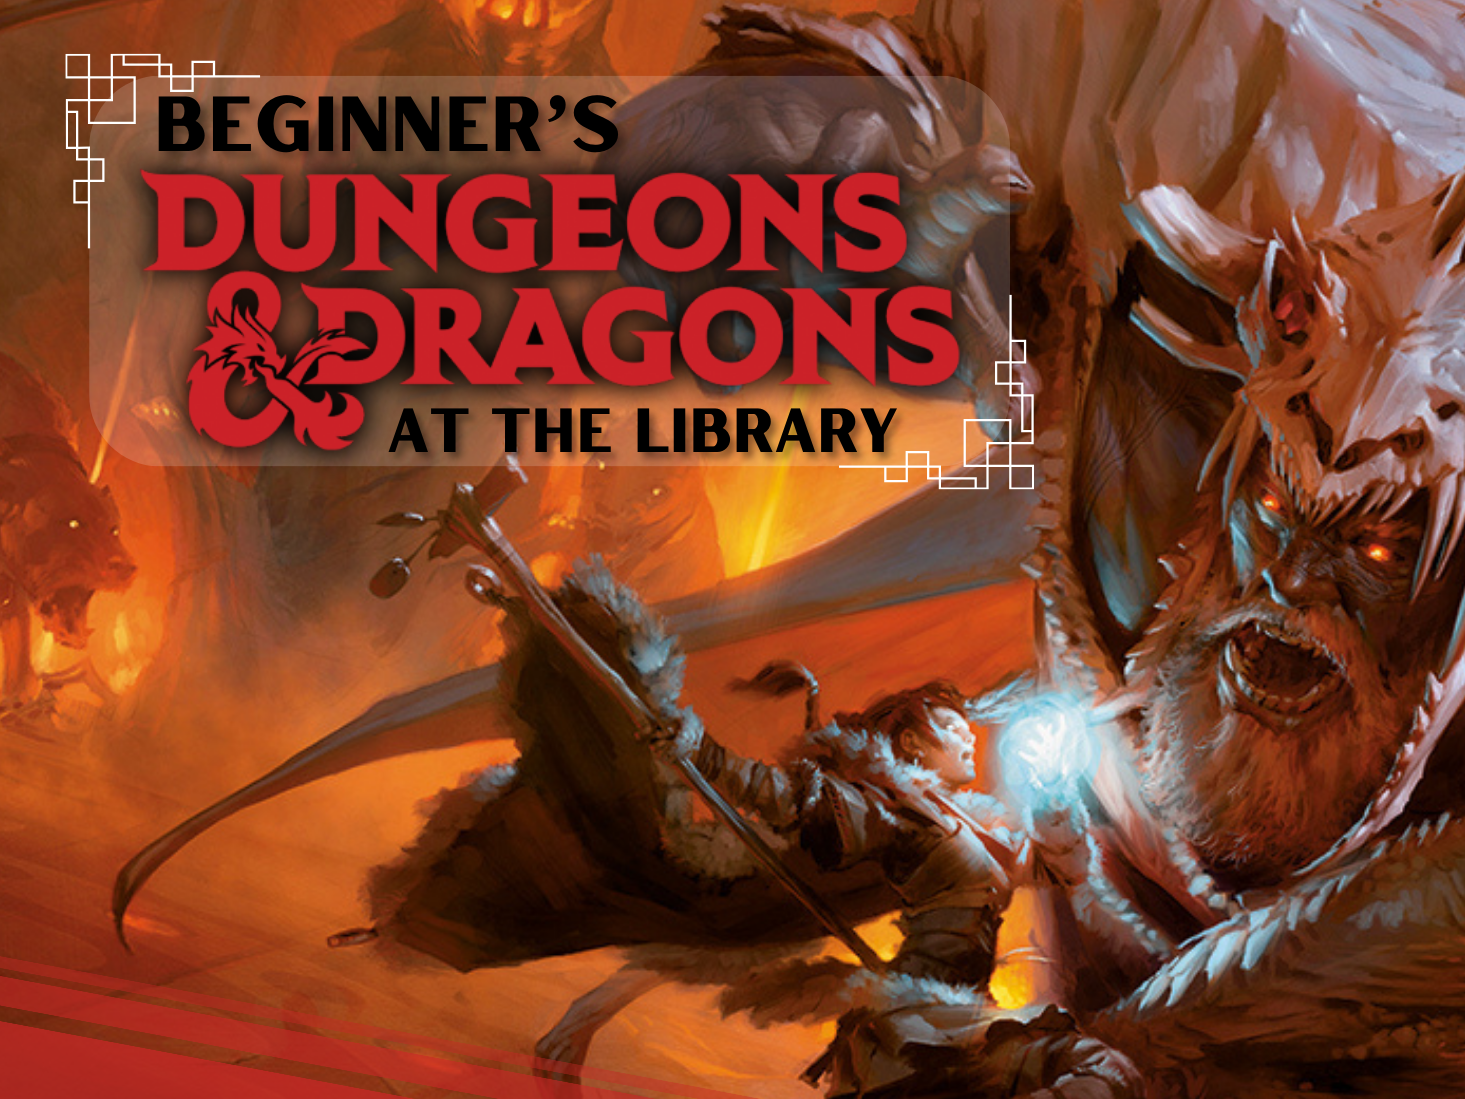 D & D at the Library